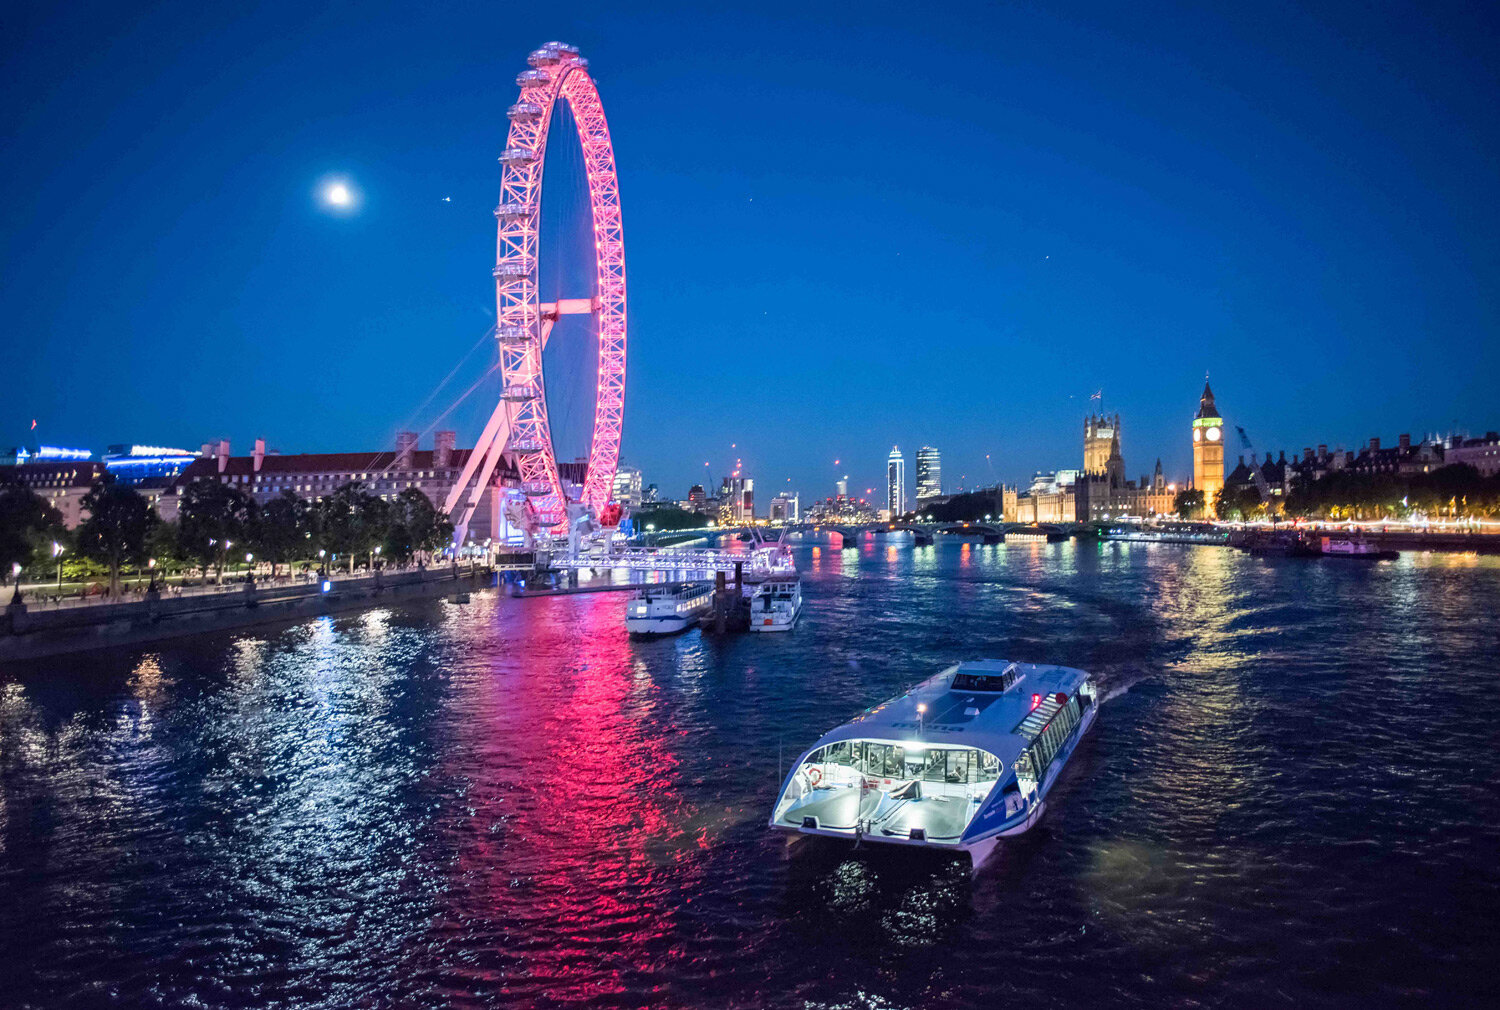  River Services.  Thames Clipper boat London Eye and Houses of Parliament.  Photograph by Eleanor Bentall.   